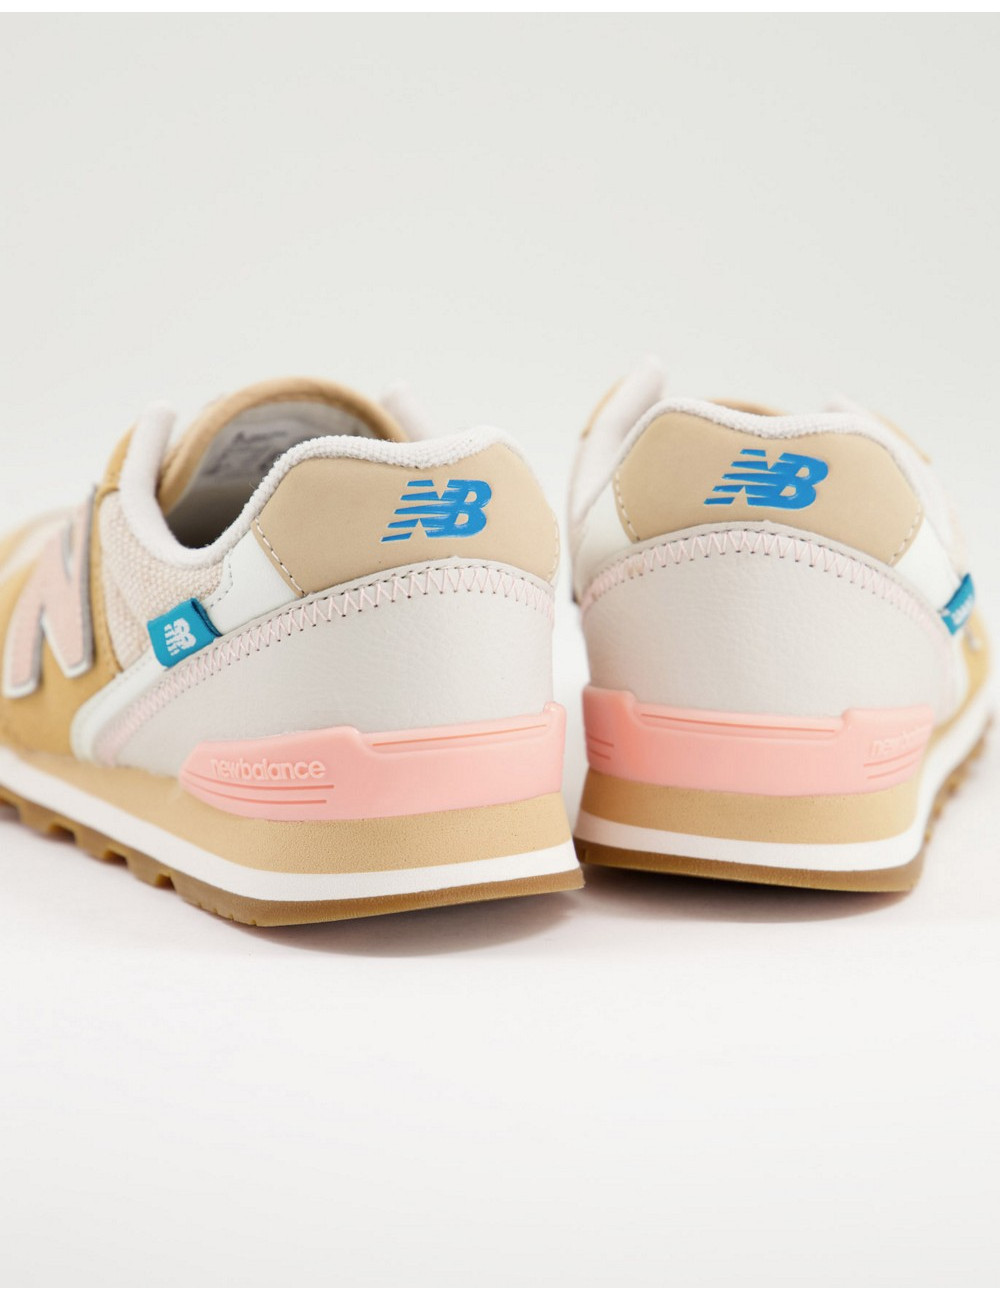 New Balance 996 trainer in tan